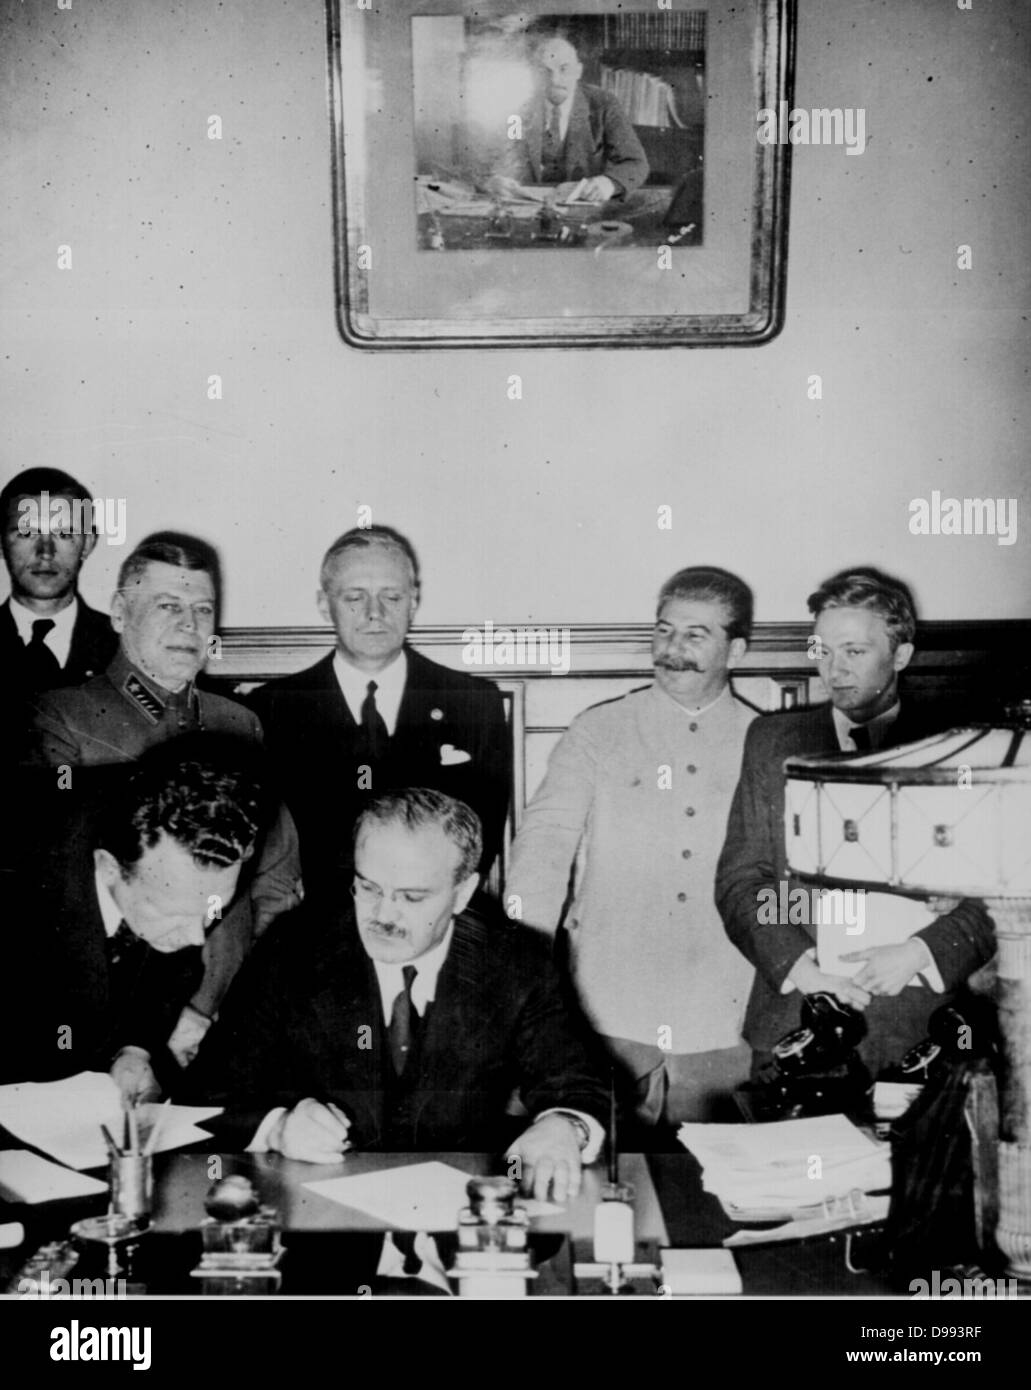 The Molotov–Ribbentrop Pact, named after the Soviet foreign minister Molotov and the German foreign minister von Ribbentrop, was an agreement known as the Treaty of Non-Aggression between Germany and the Soviet Union[, signed in Moscow 23 August 1939. Stock Photo